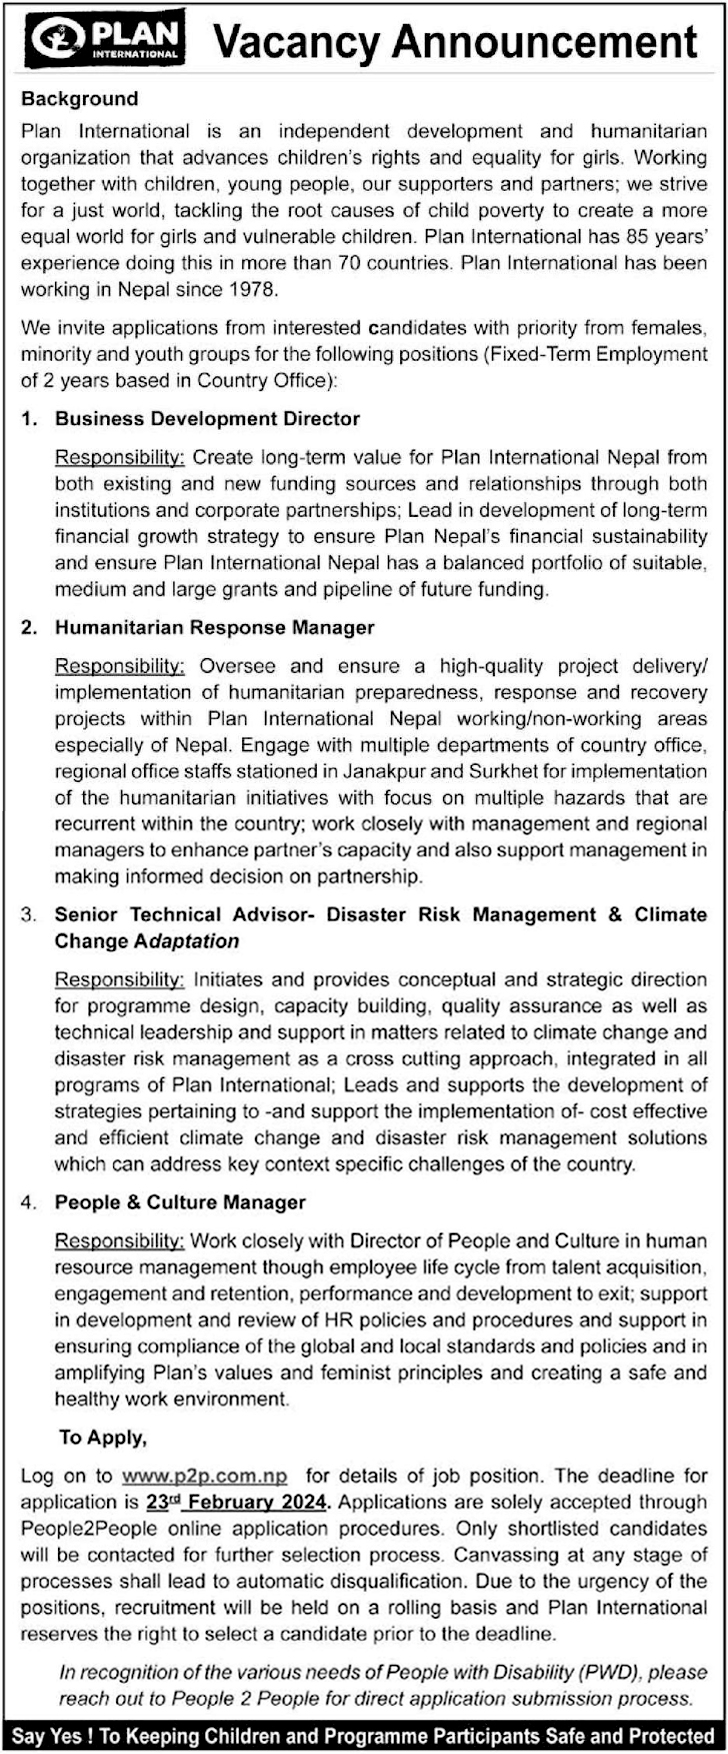 People & Culture Manager